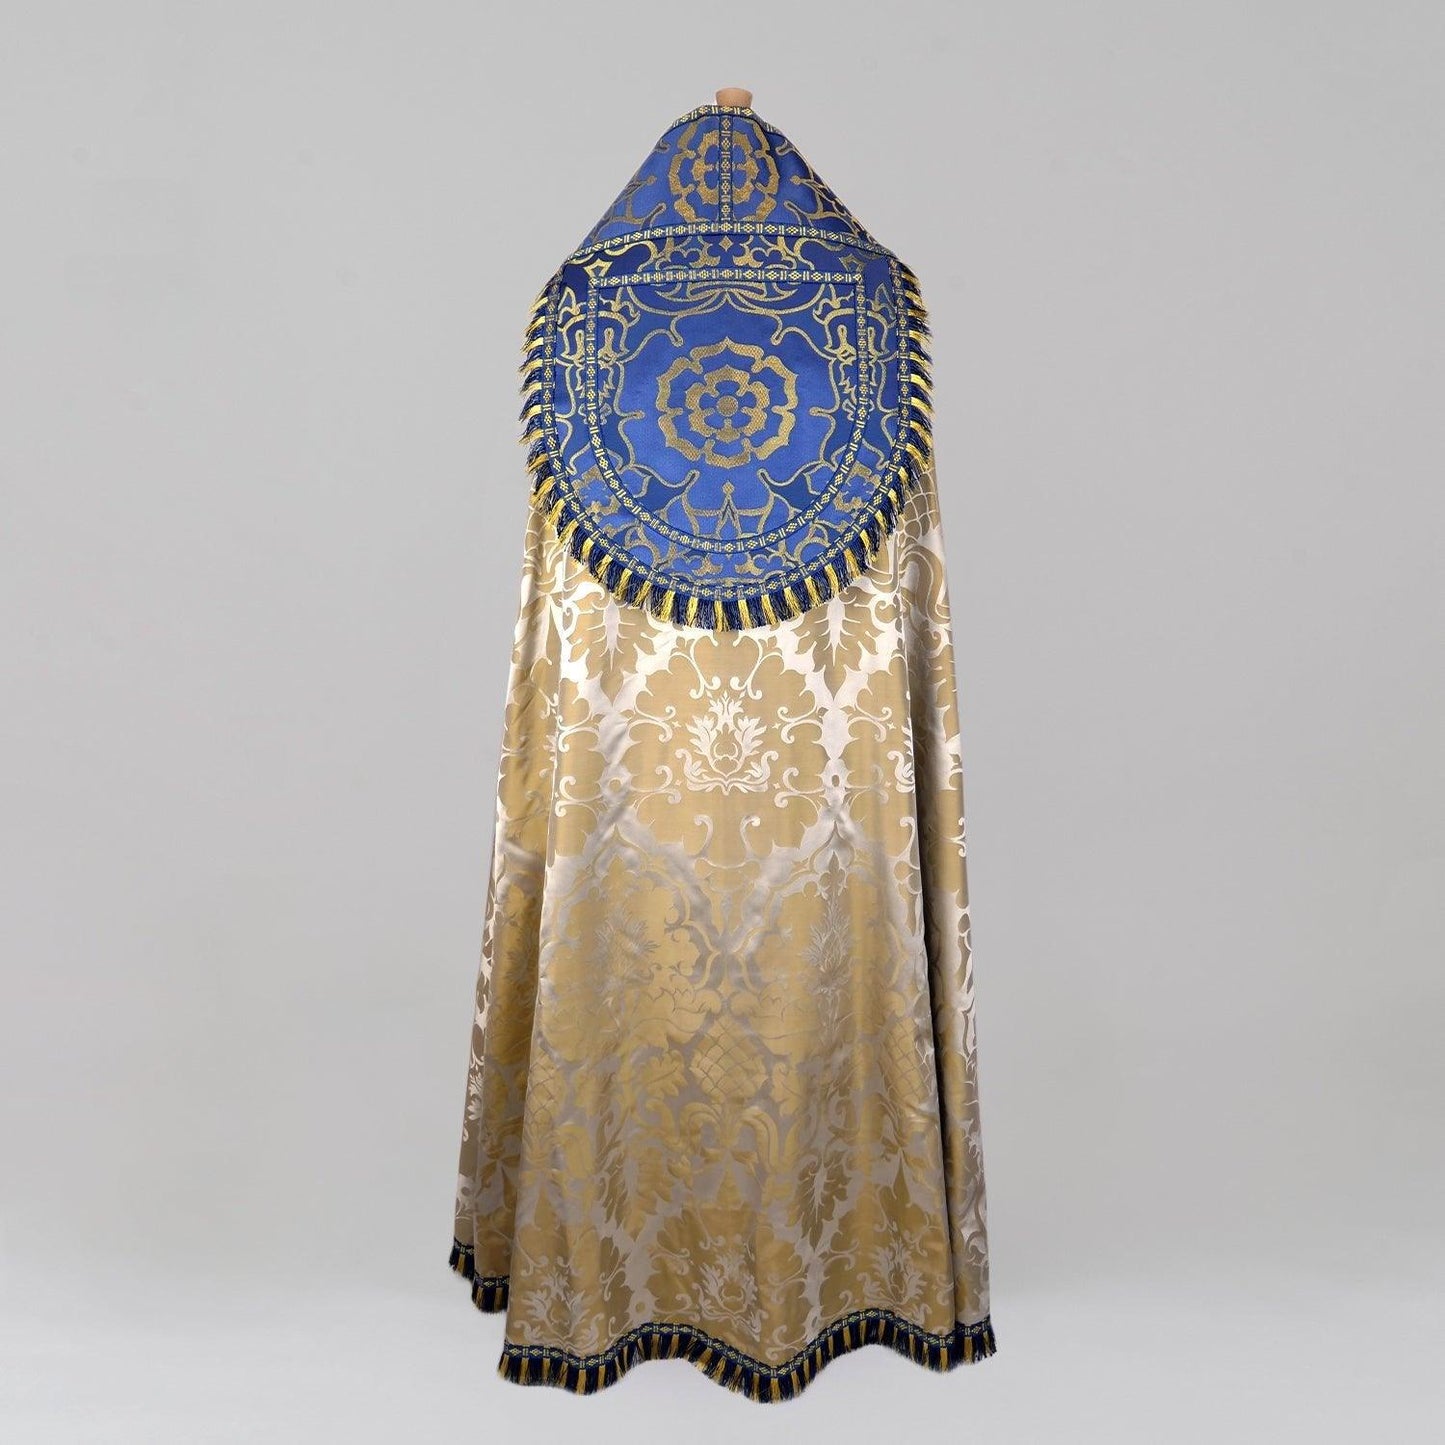 Gothic High Mass Set in Oyster 'Bellini' with Blue/Gold 'Coronation' Orphreys - Watts & Co.